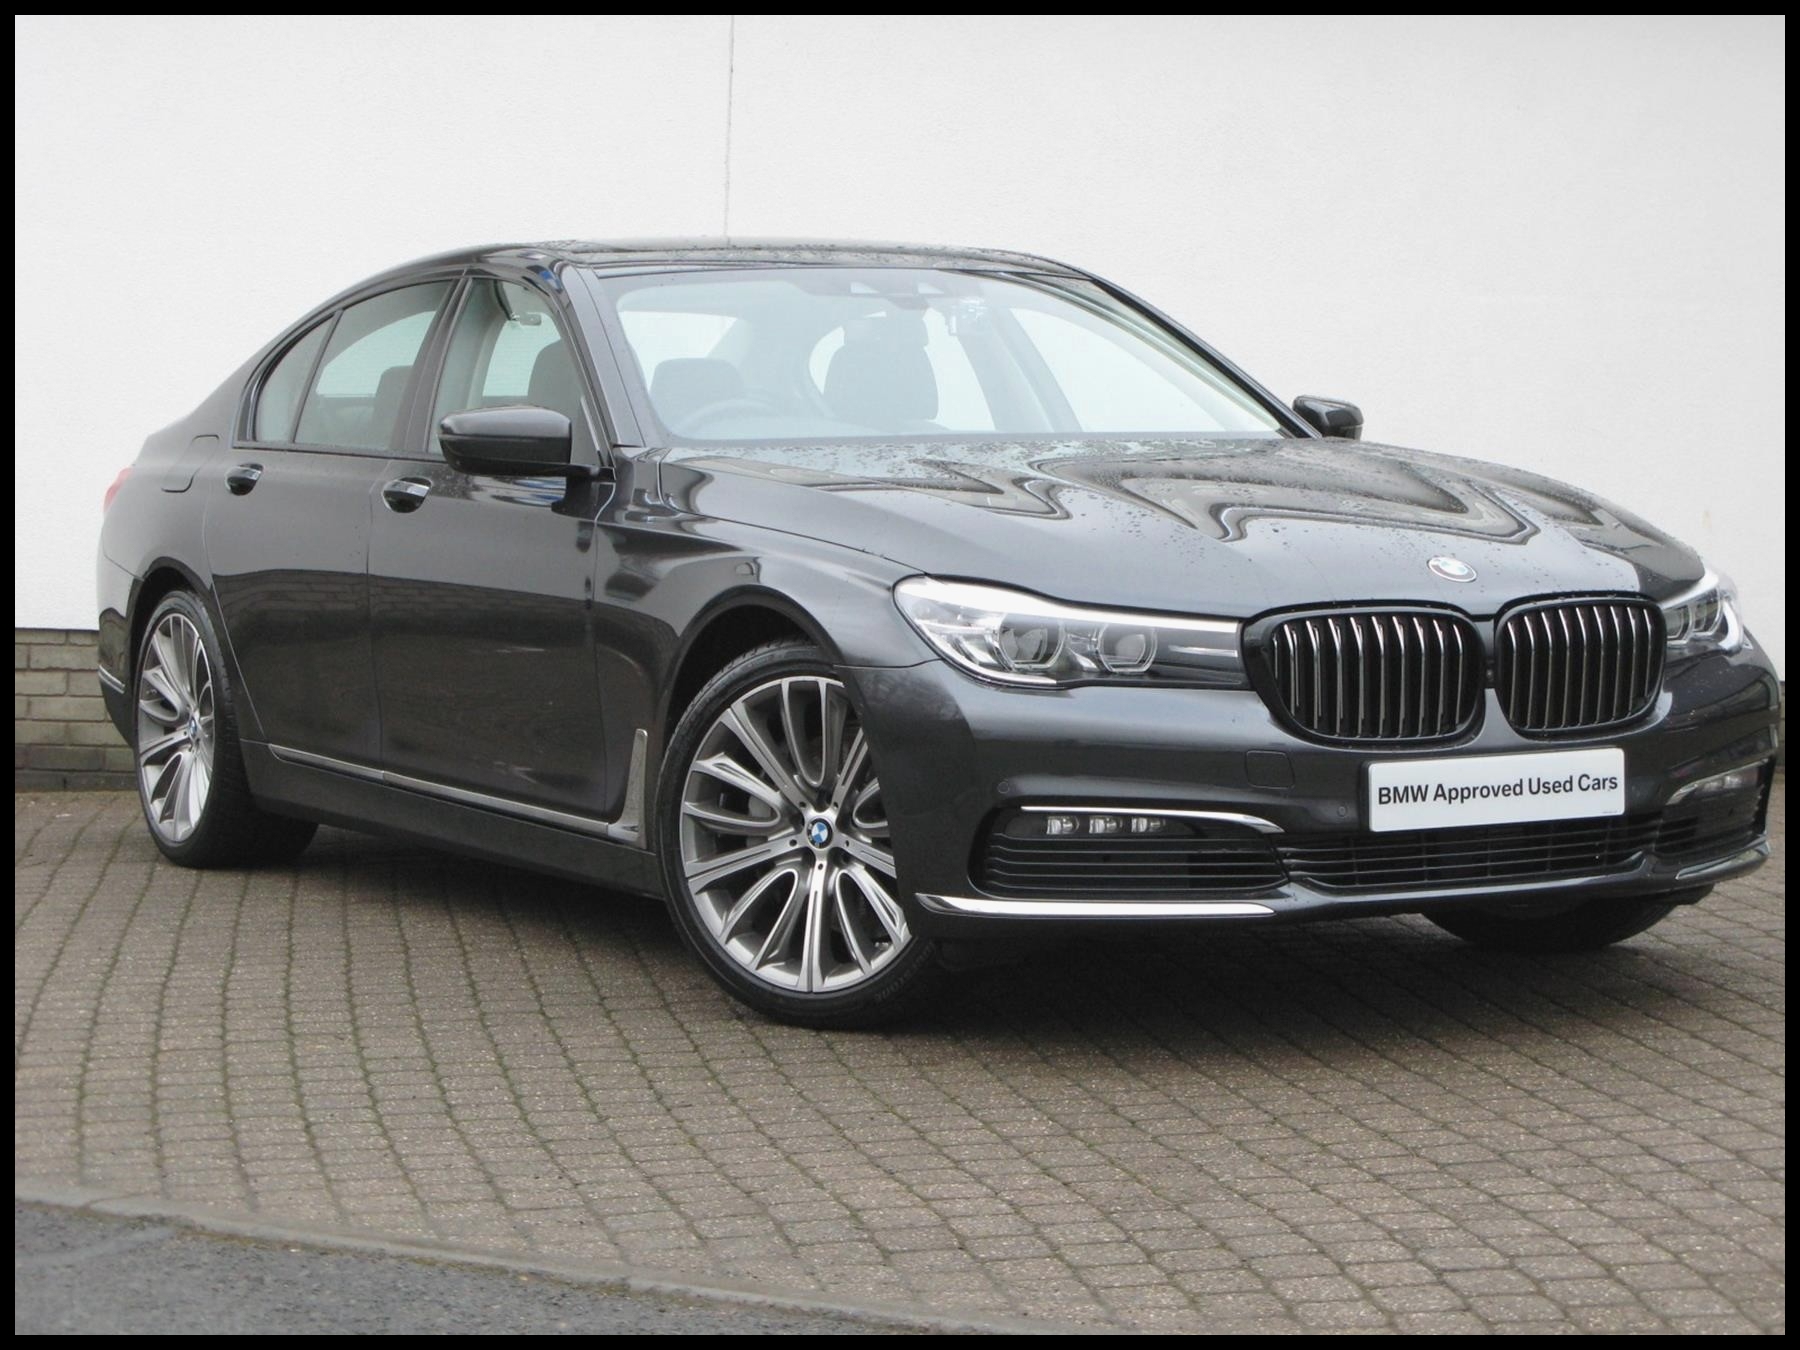 Bmw 7 Series for Sale Awesome Used 2017 Bmw 7 Series G11 740d Xdrive Saloon B57